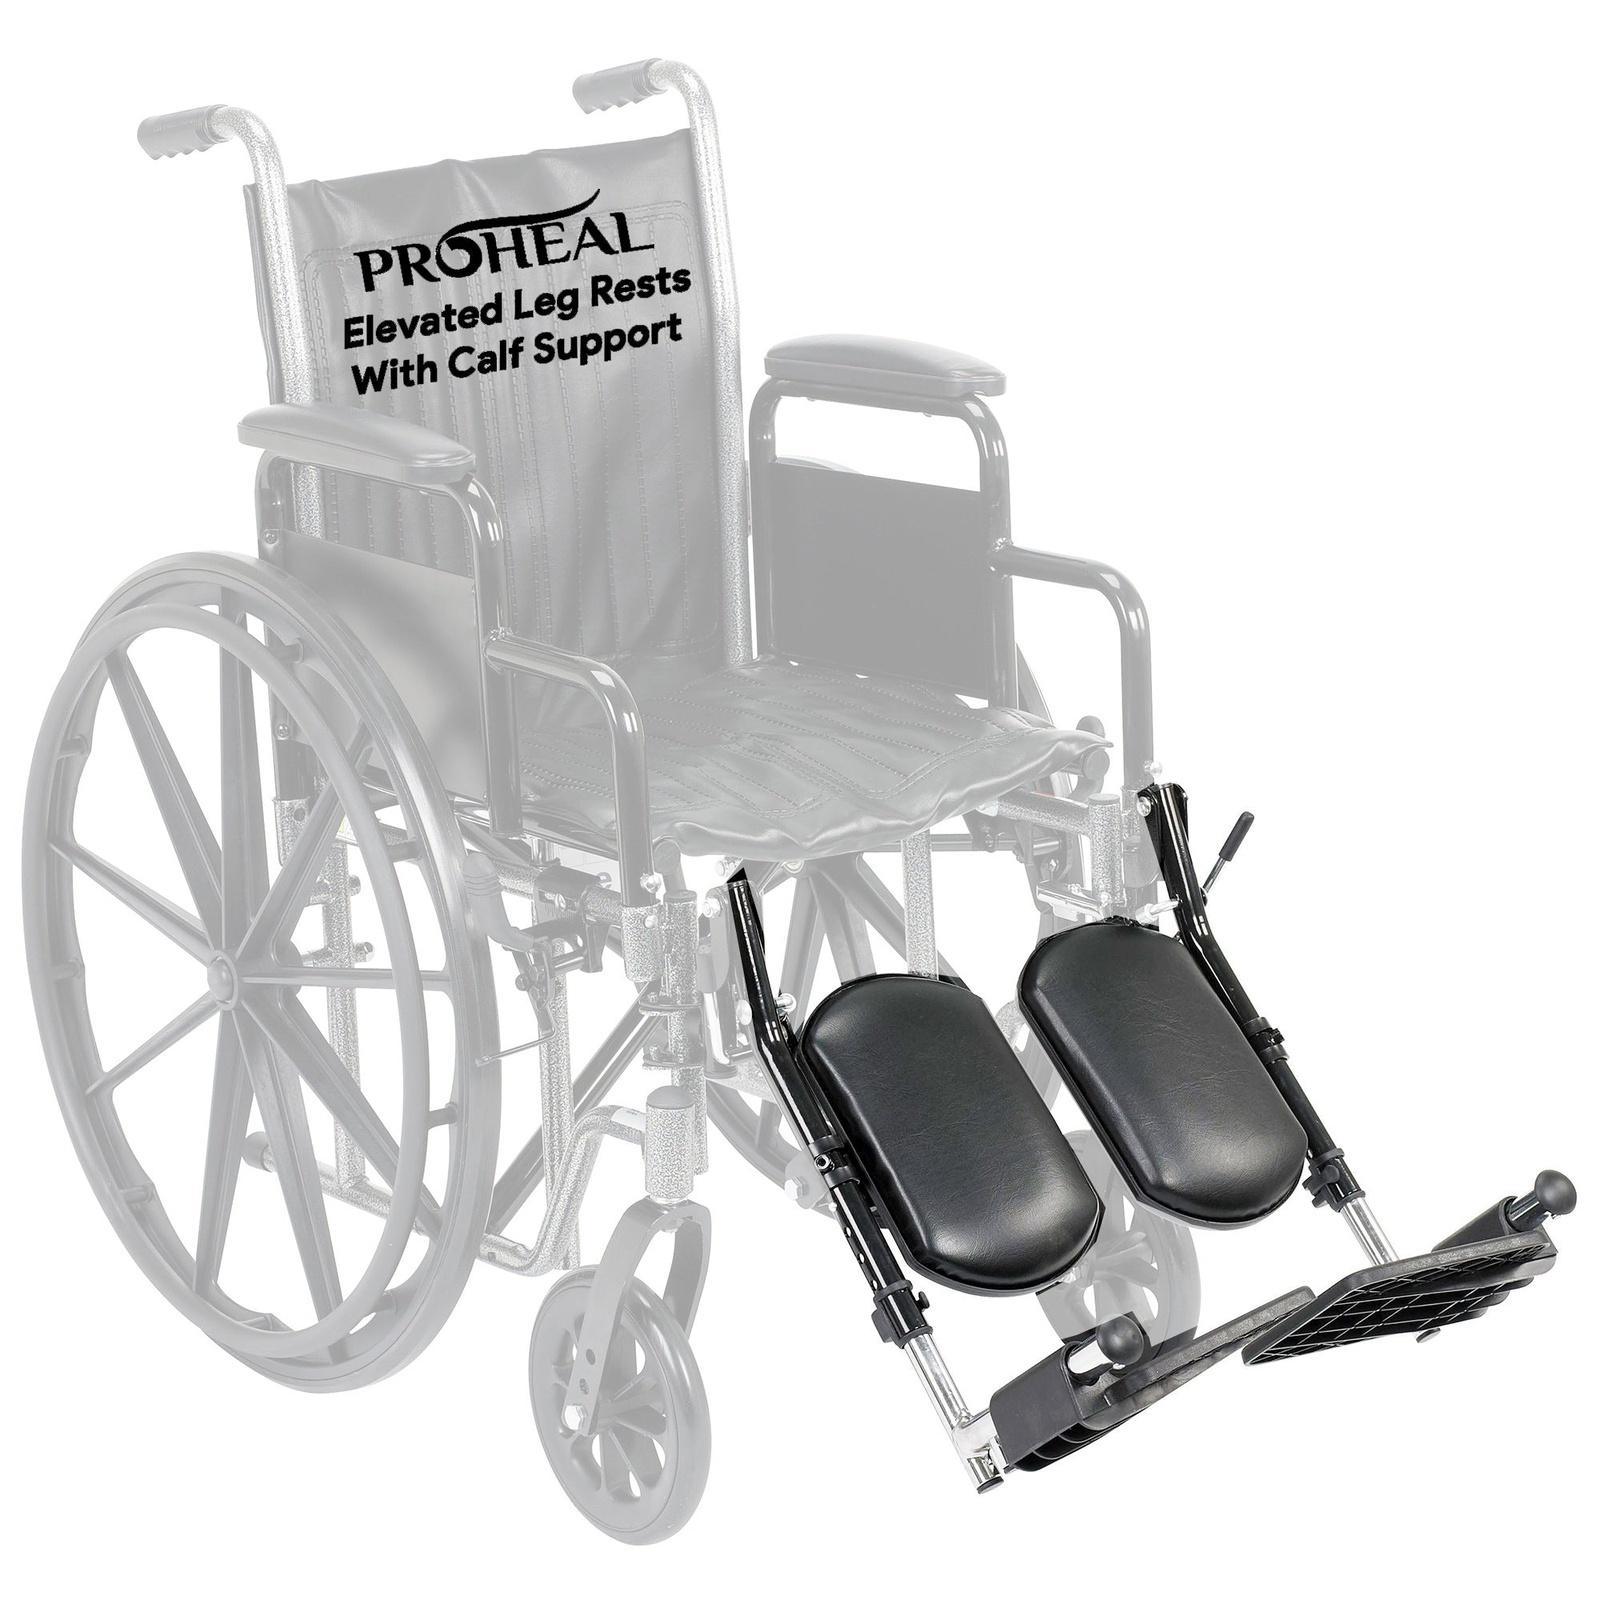 Wheelchair Accessories To Increase Comfort, Safety, And Convenience -  Pressure Sore Prevention & Treatment